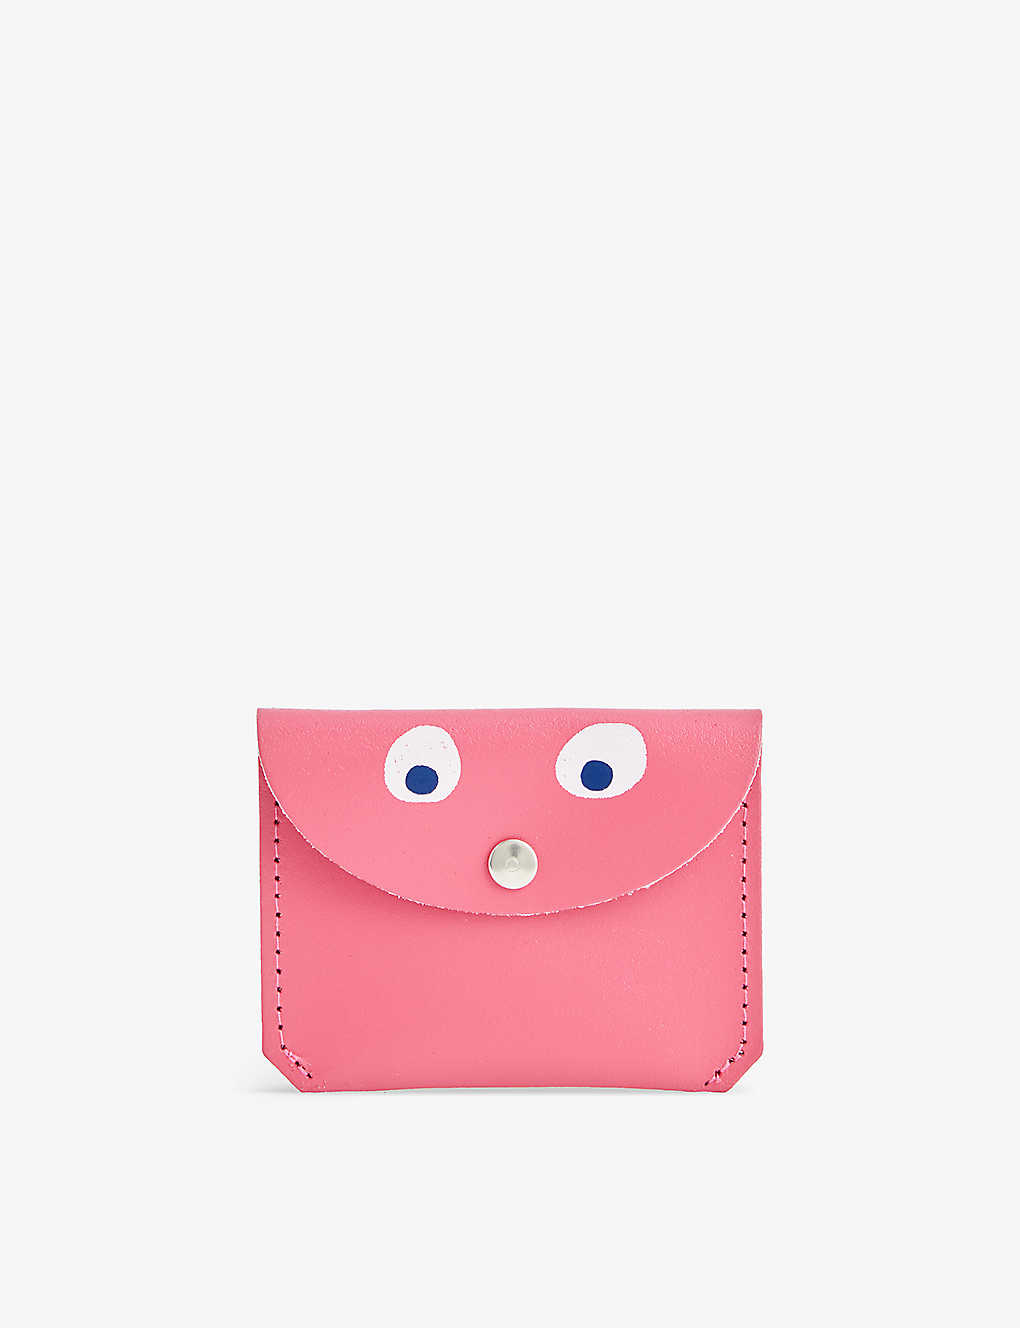 Ark Colour Design Womens New Pink Google Eye Front-flap Leather Purse